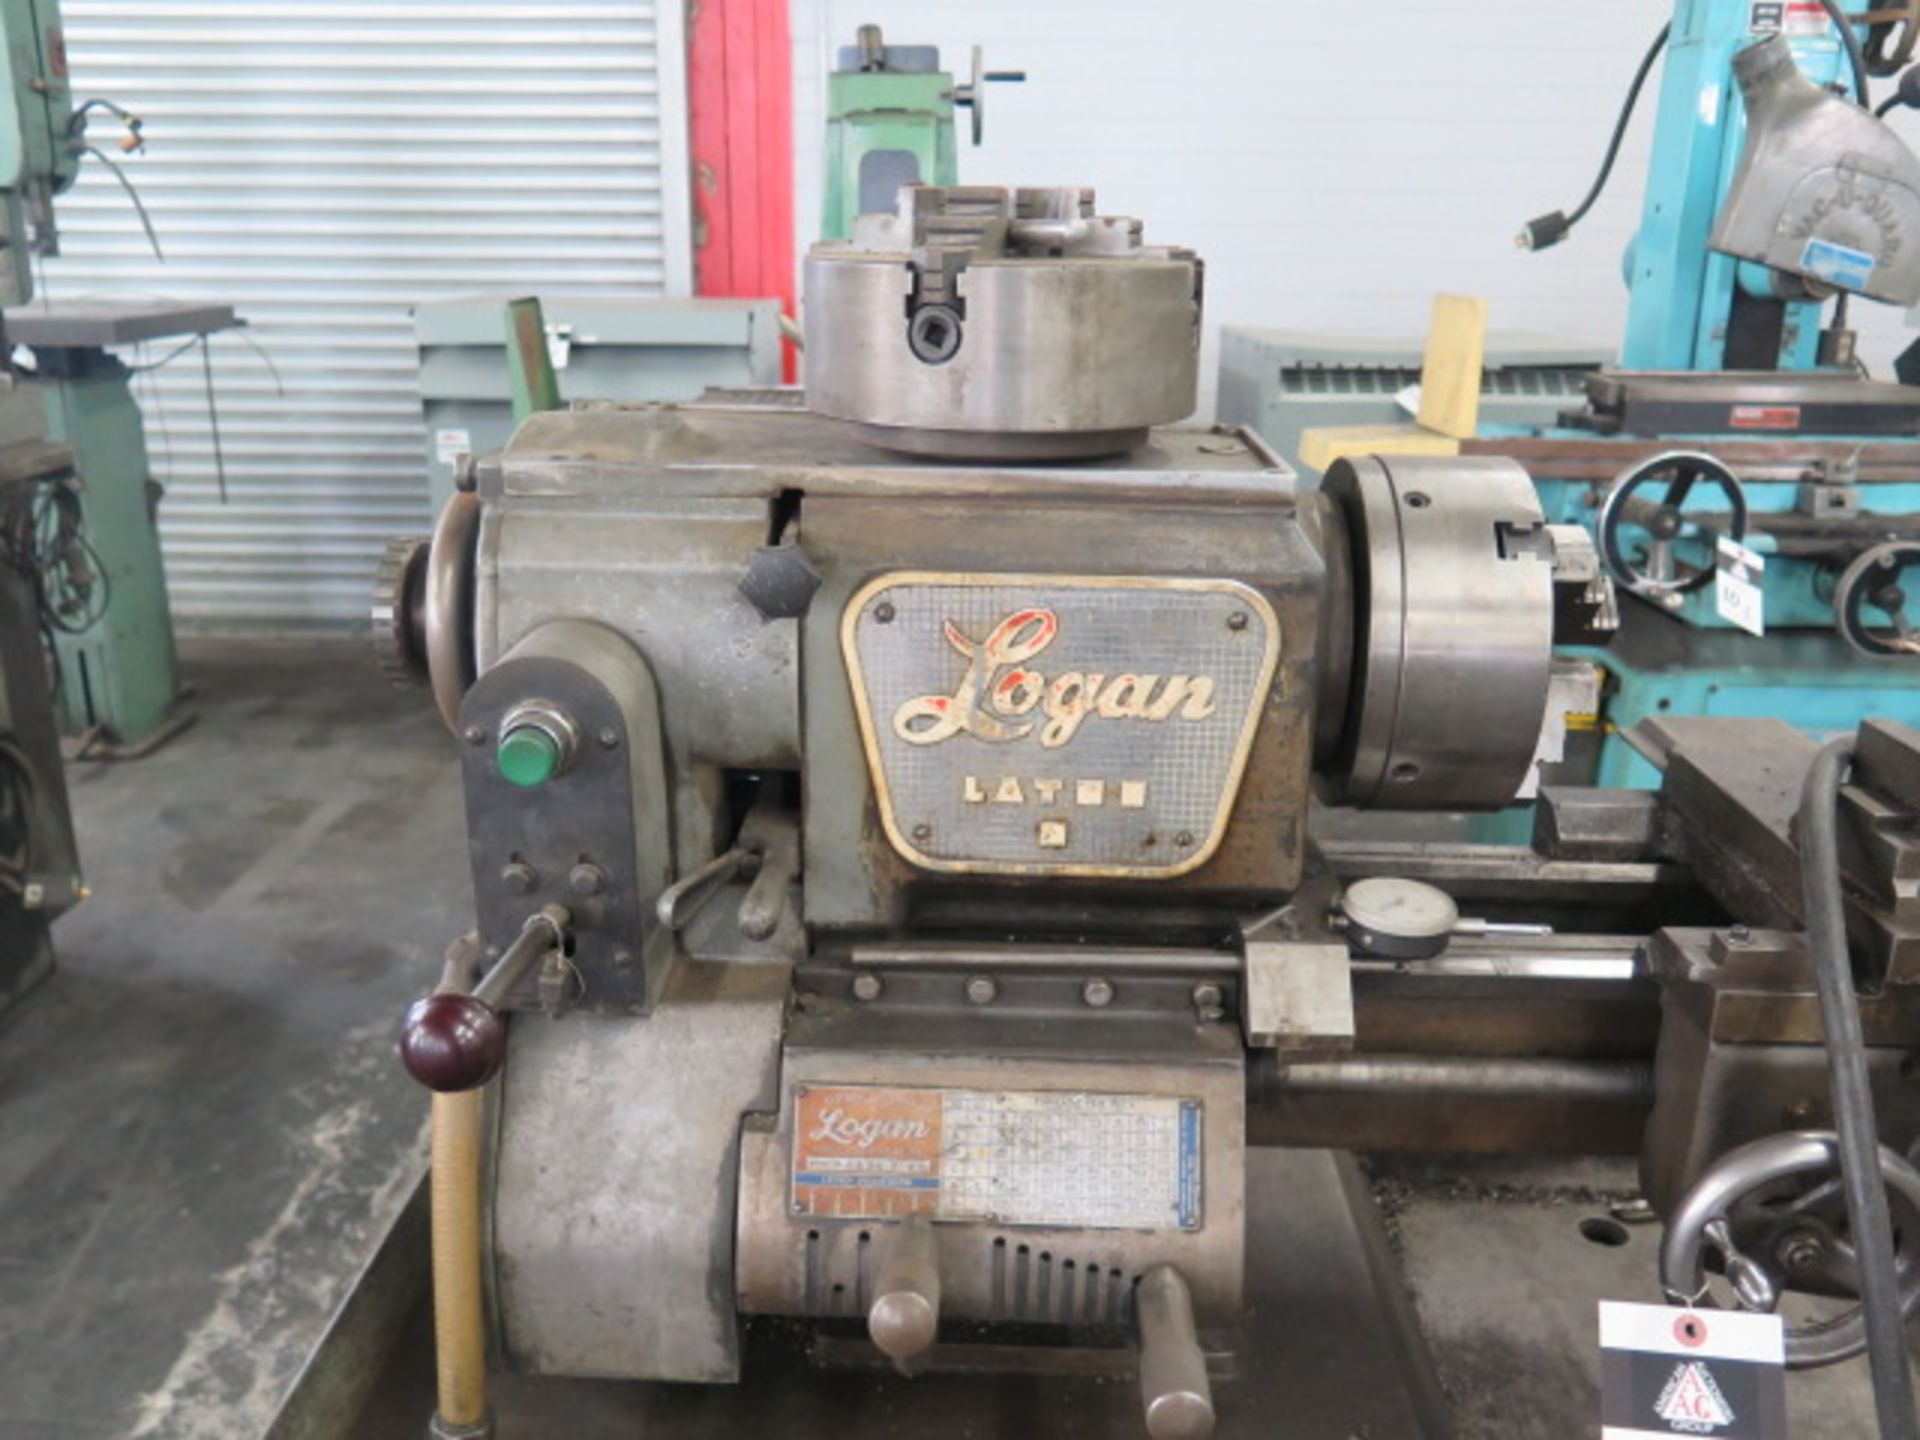 Logan mdl. 2535-2VH 12" x 24" Lathe s/n 83331 w/ 55-2000 Dial RPM, Inch Threading, Tailstock, 7 1/2" - Image 4 of 8